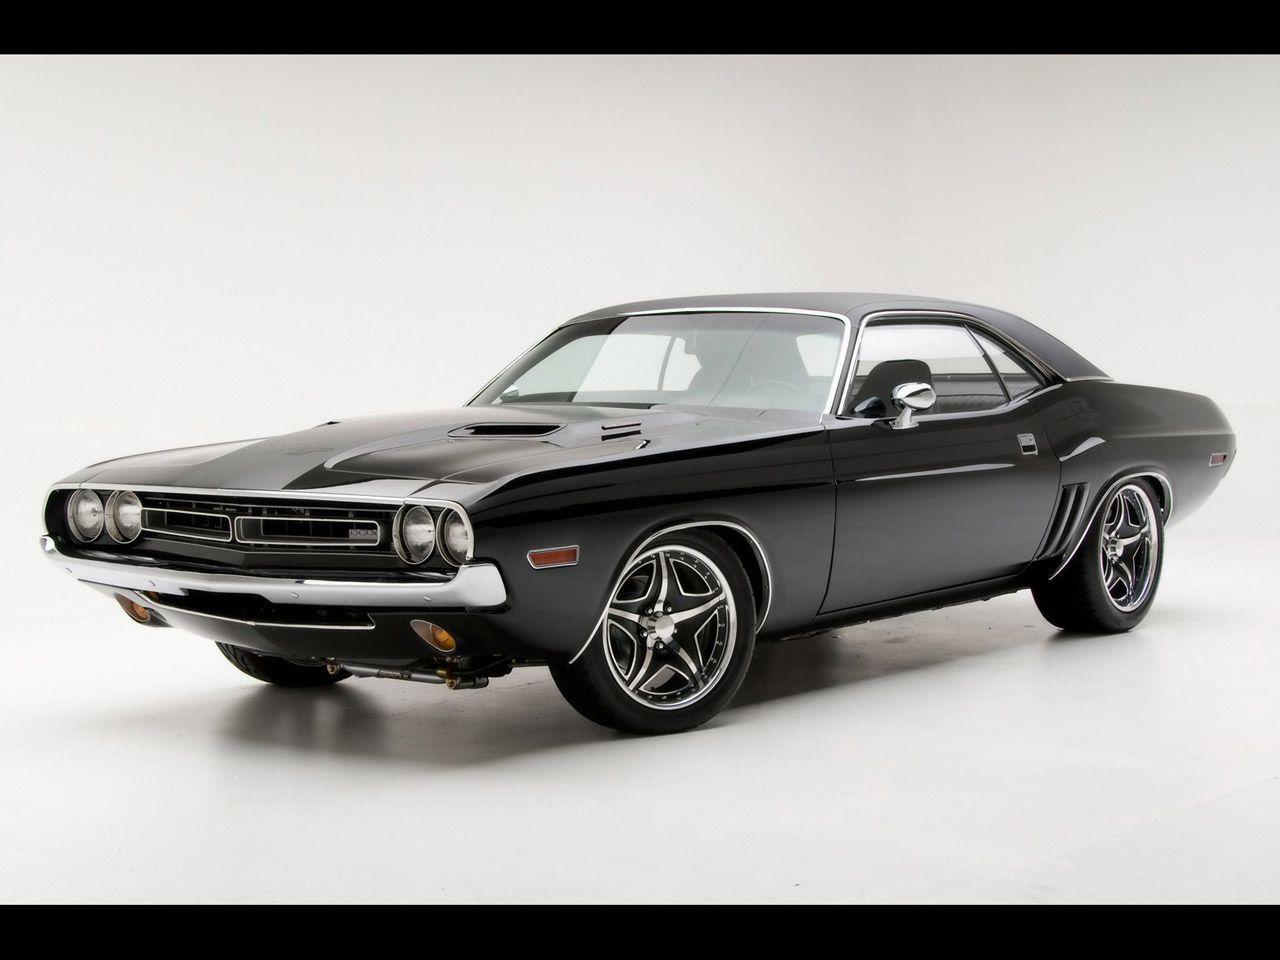 Free Image Online: Muscle car wallpaper